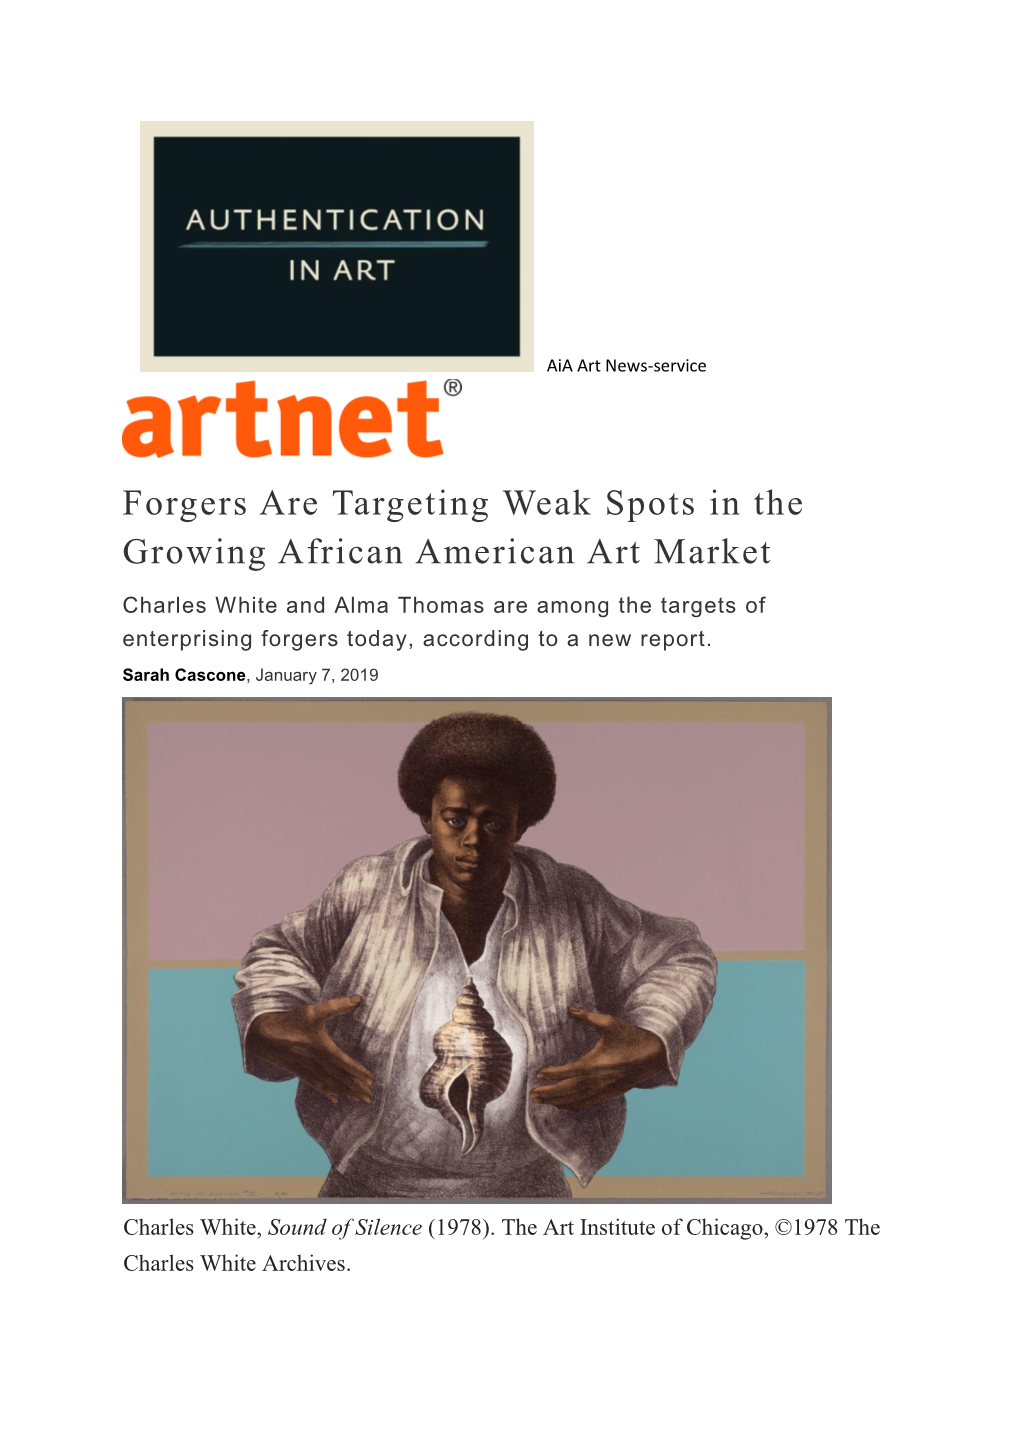 Forgers Are Targeting Weak Spots in the Growing African American Art Market